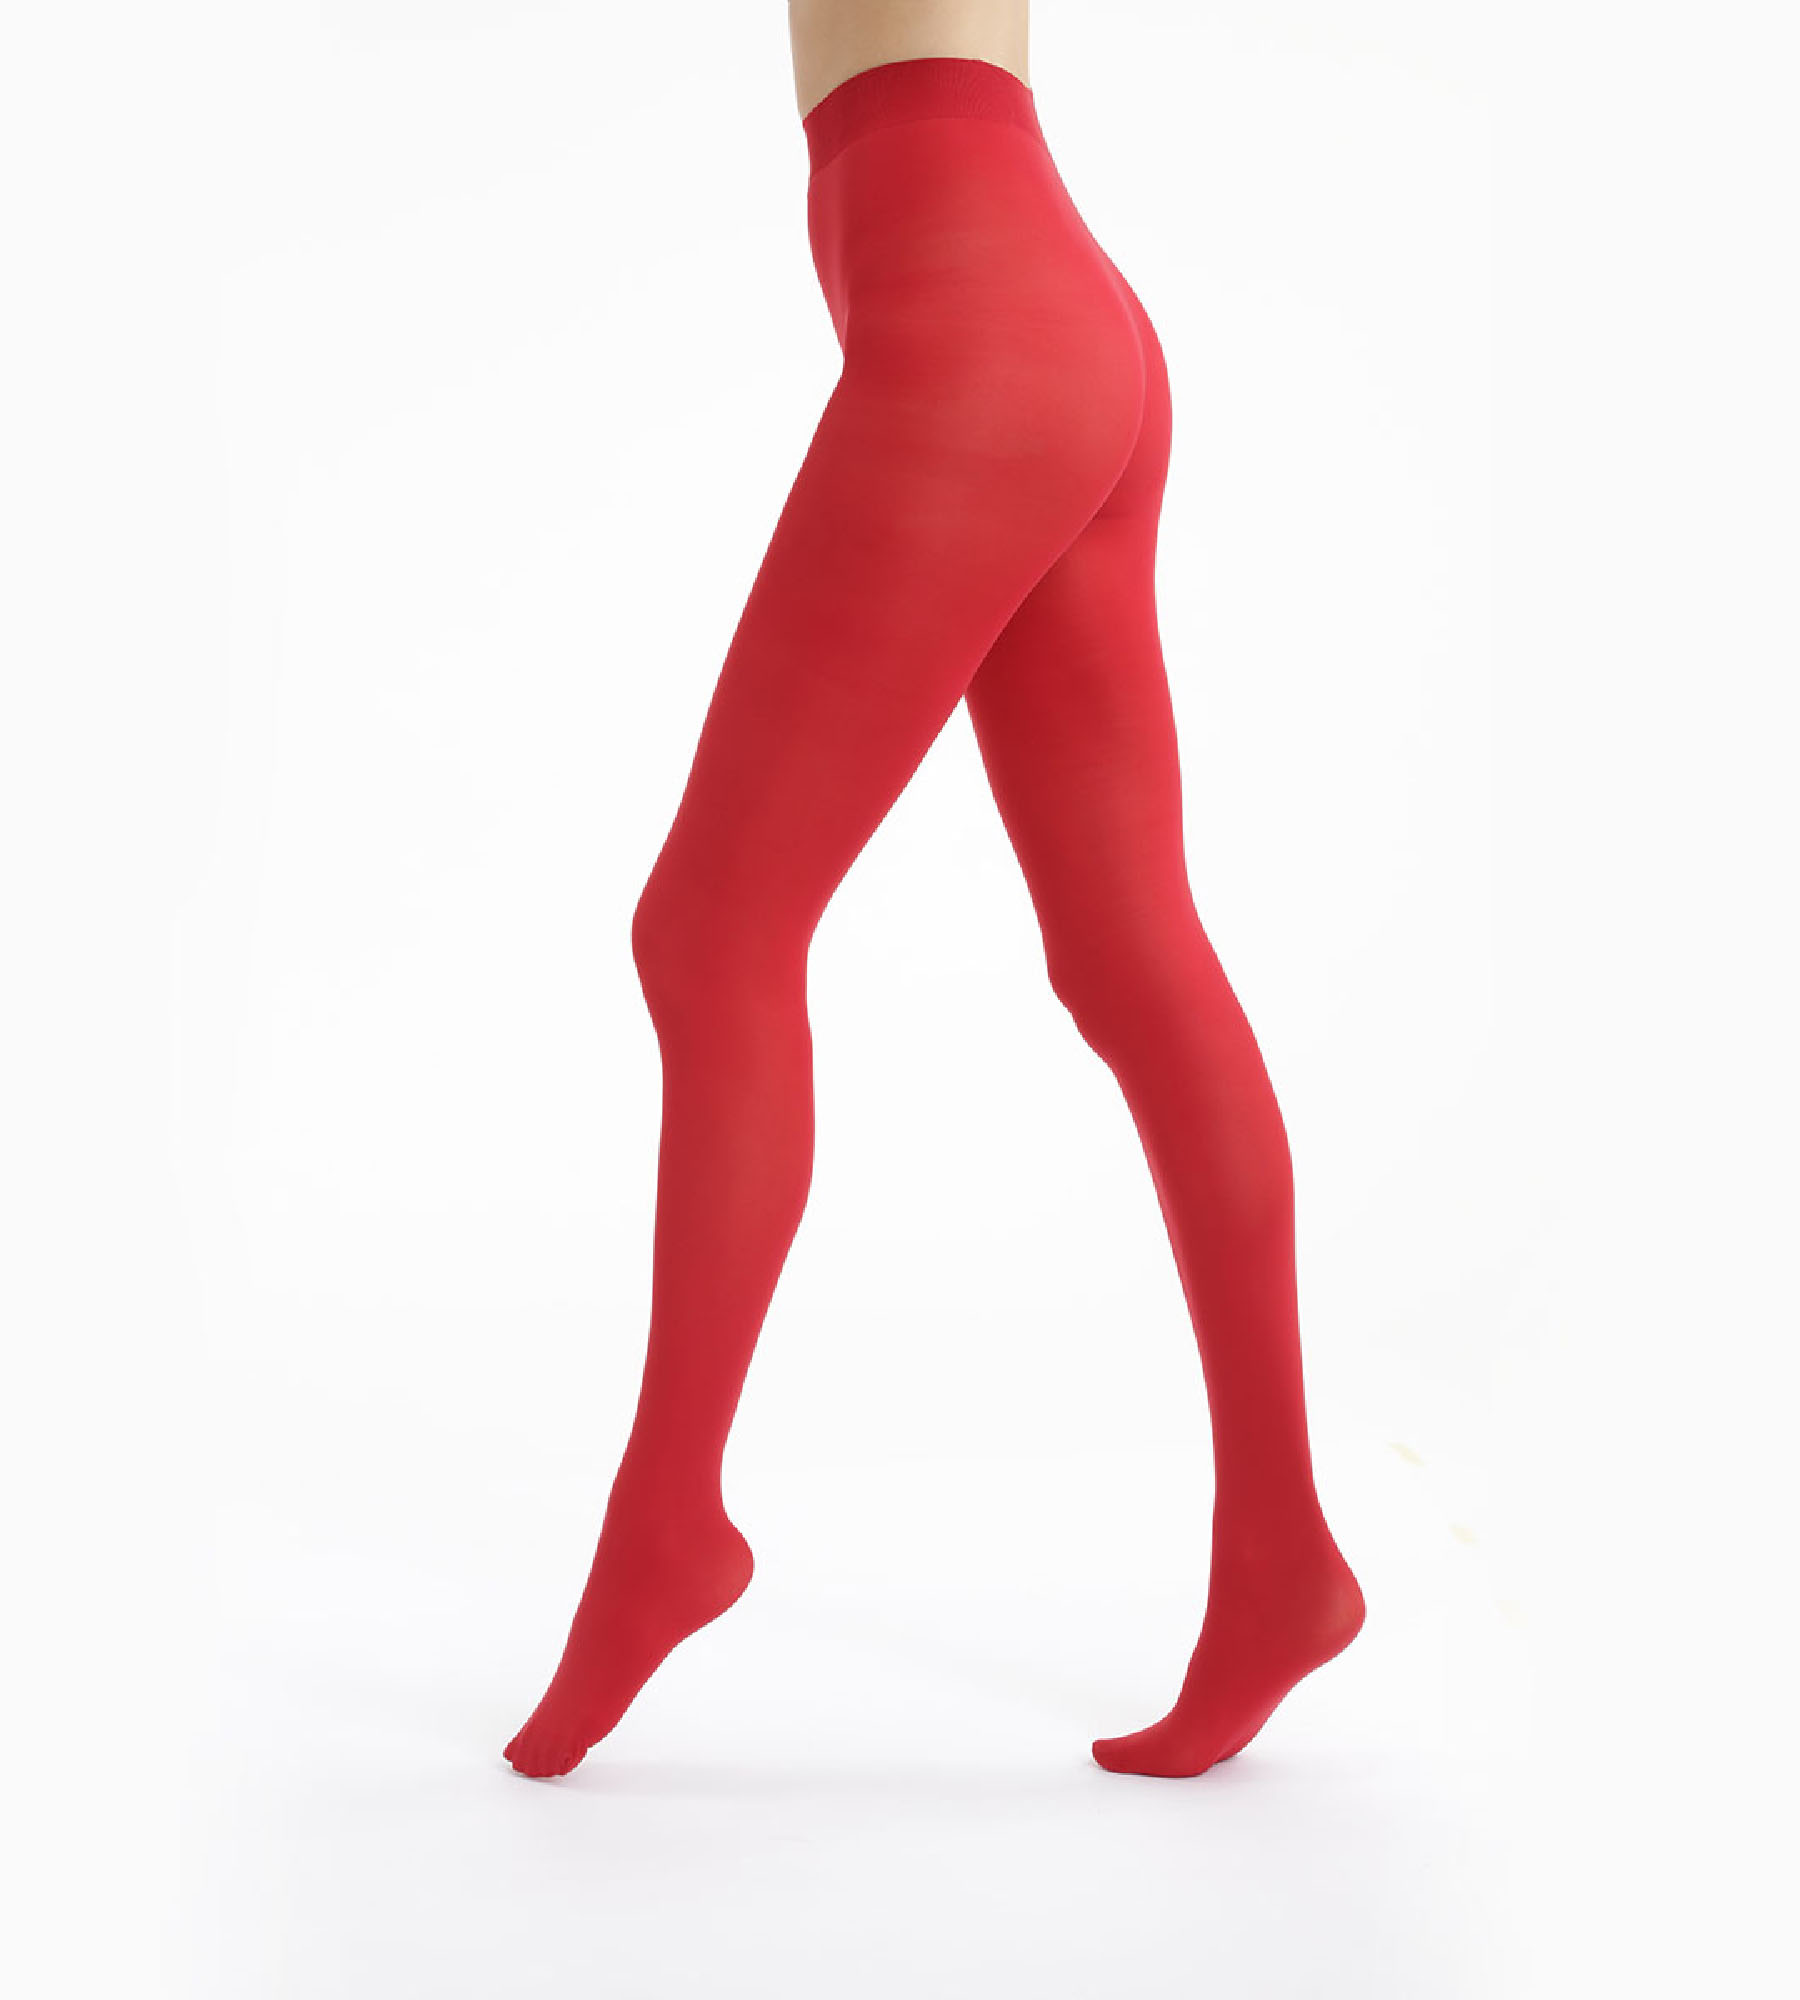 Deep Red Colour Splash (Tie Dye) – Red Opaque Footless Pantyhose (Tights)